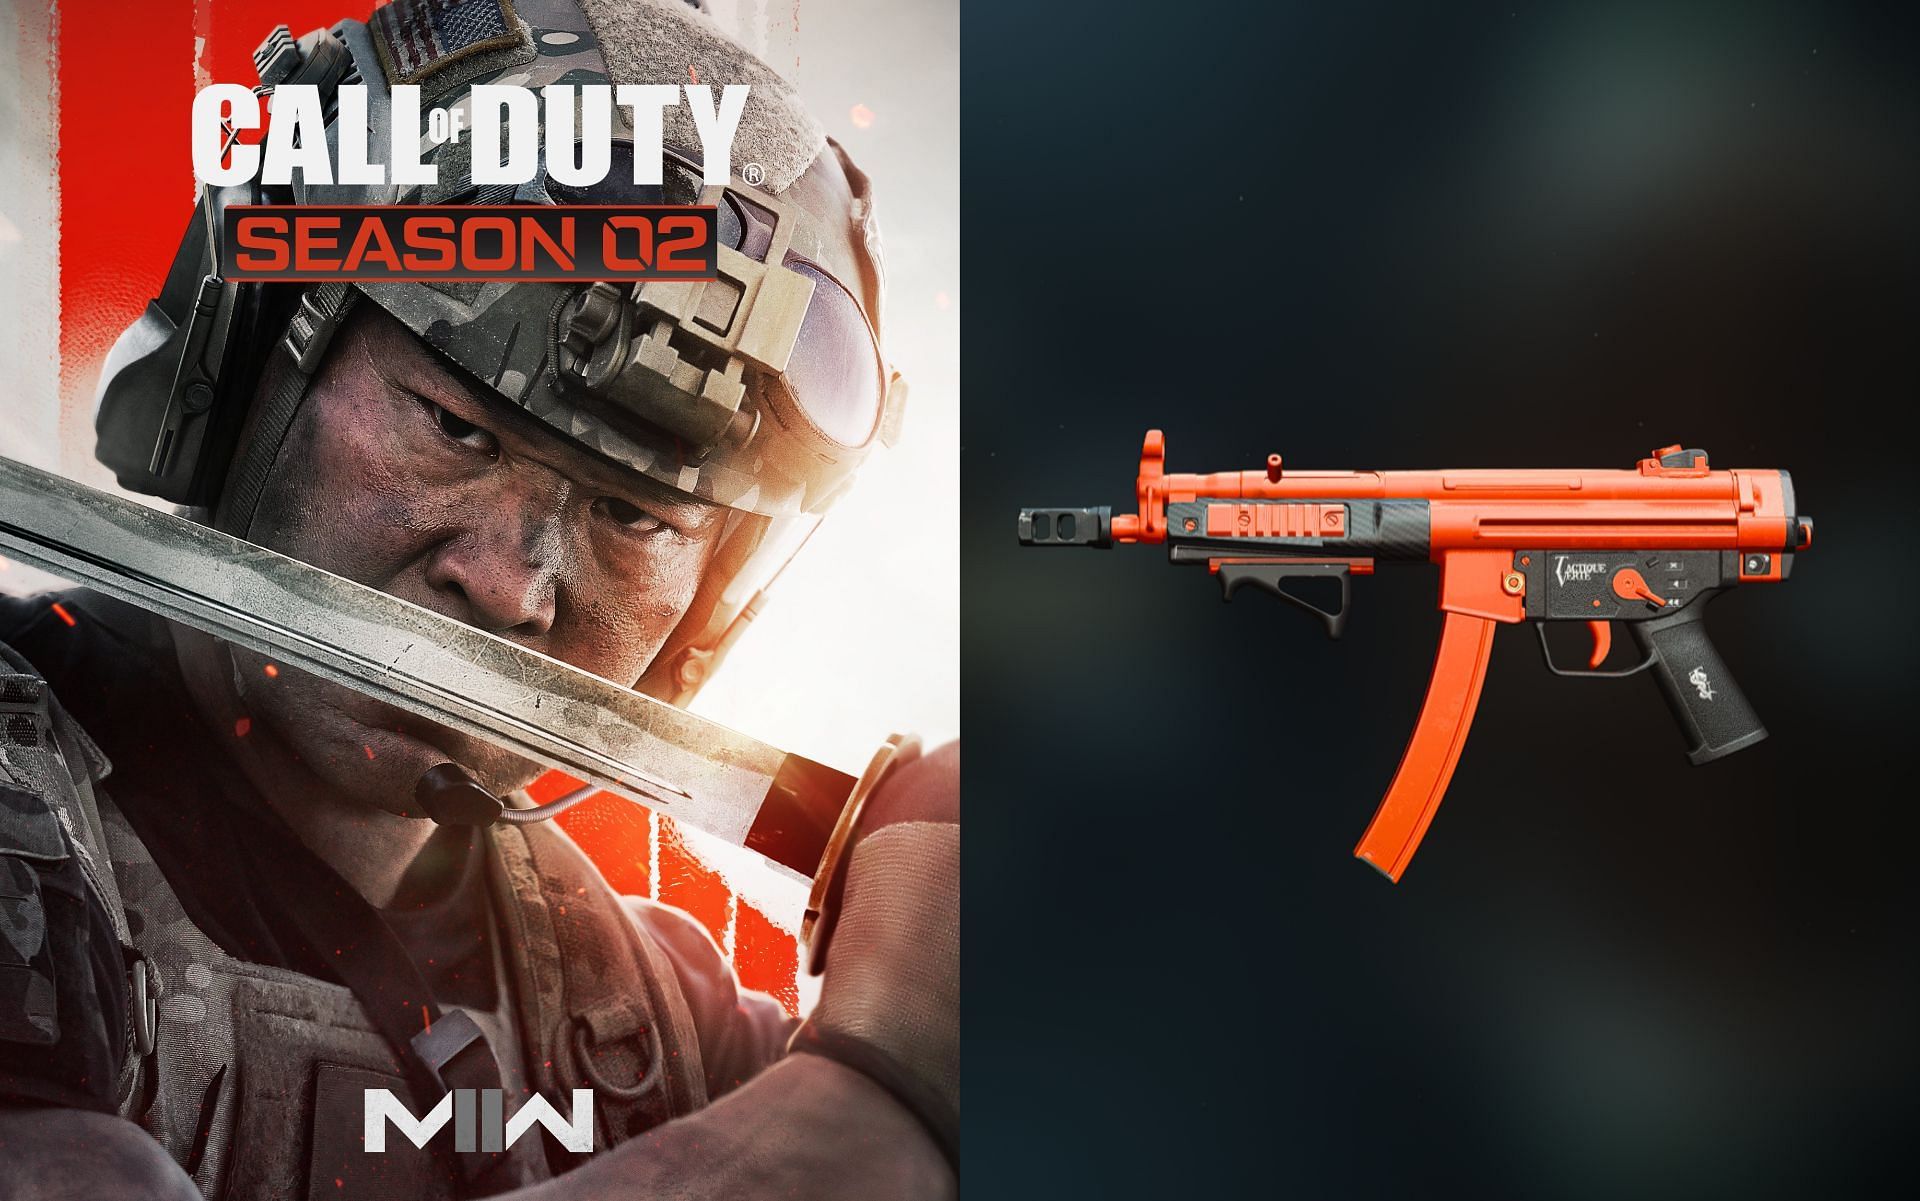 Best Lachmann Sub loadout for Modern Warfare 2 Ranked revealed by TeeP (Images via Activision)